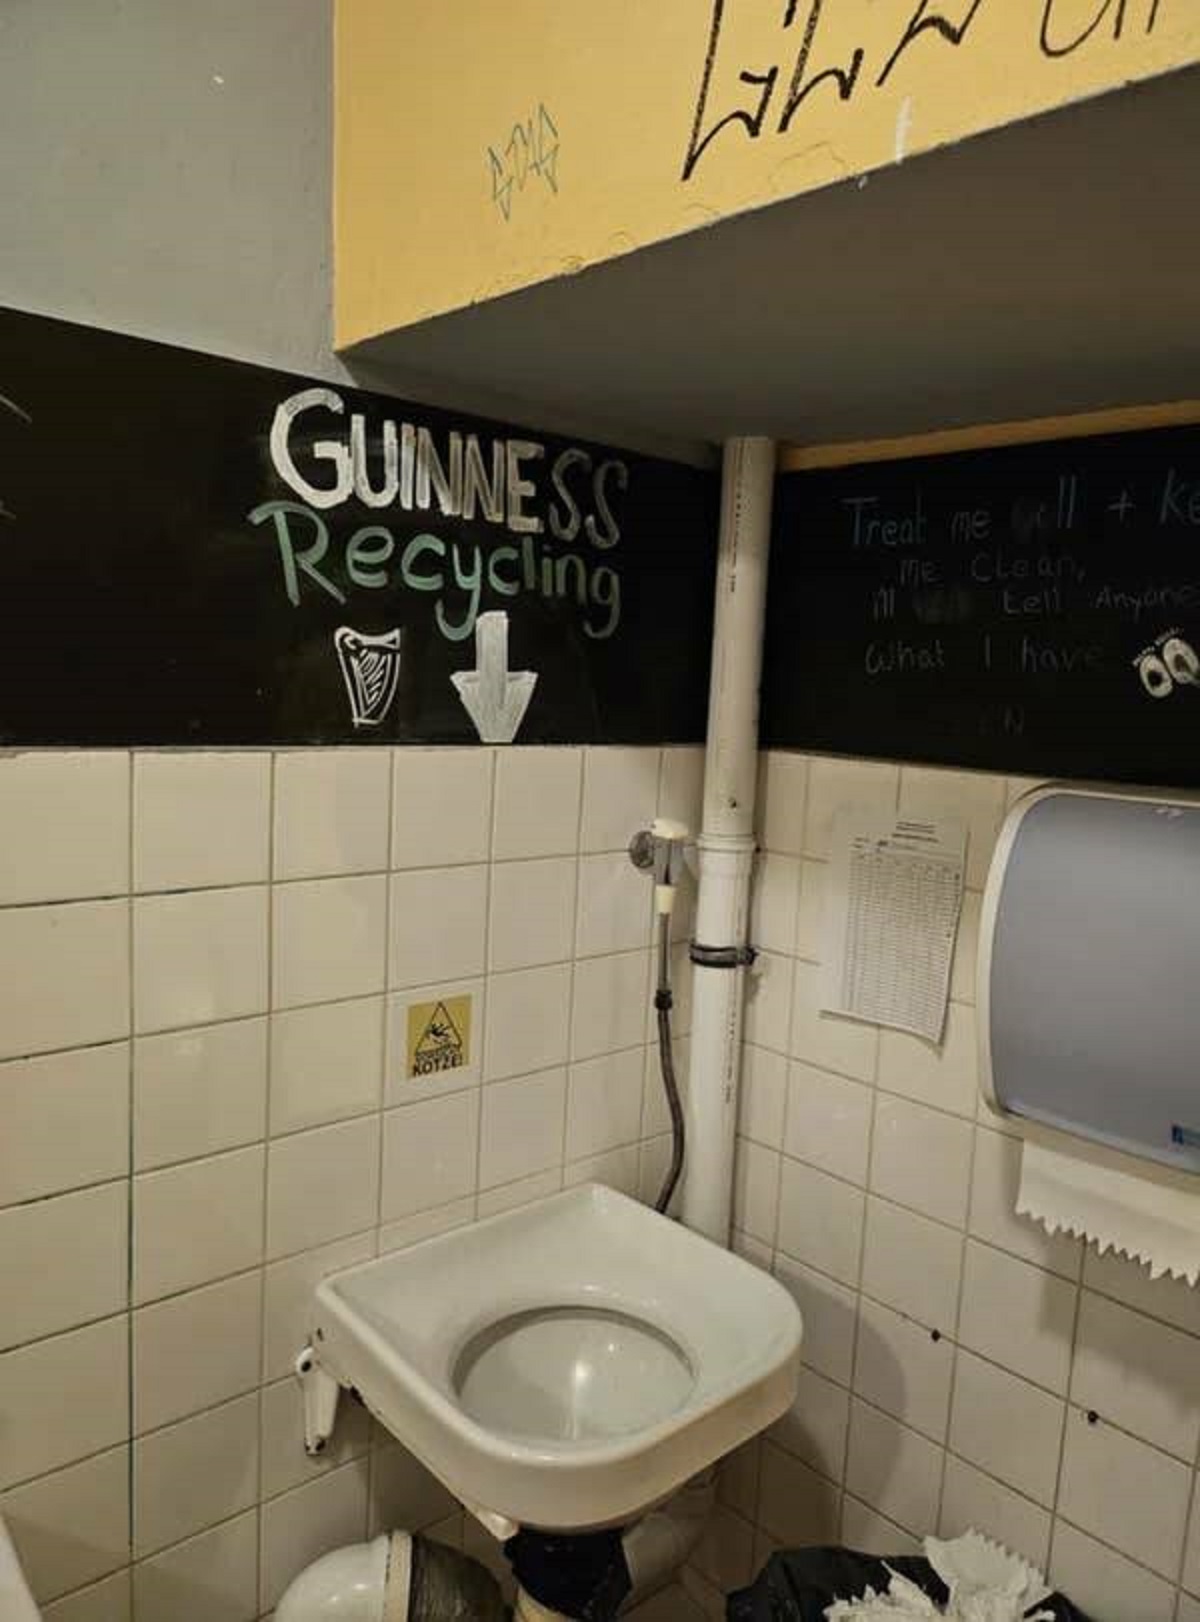 Honestly, more college bars could use a vomit sink, like this one in Germany.